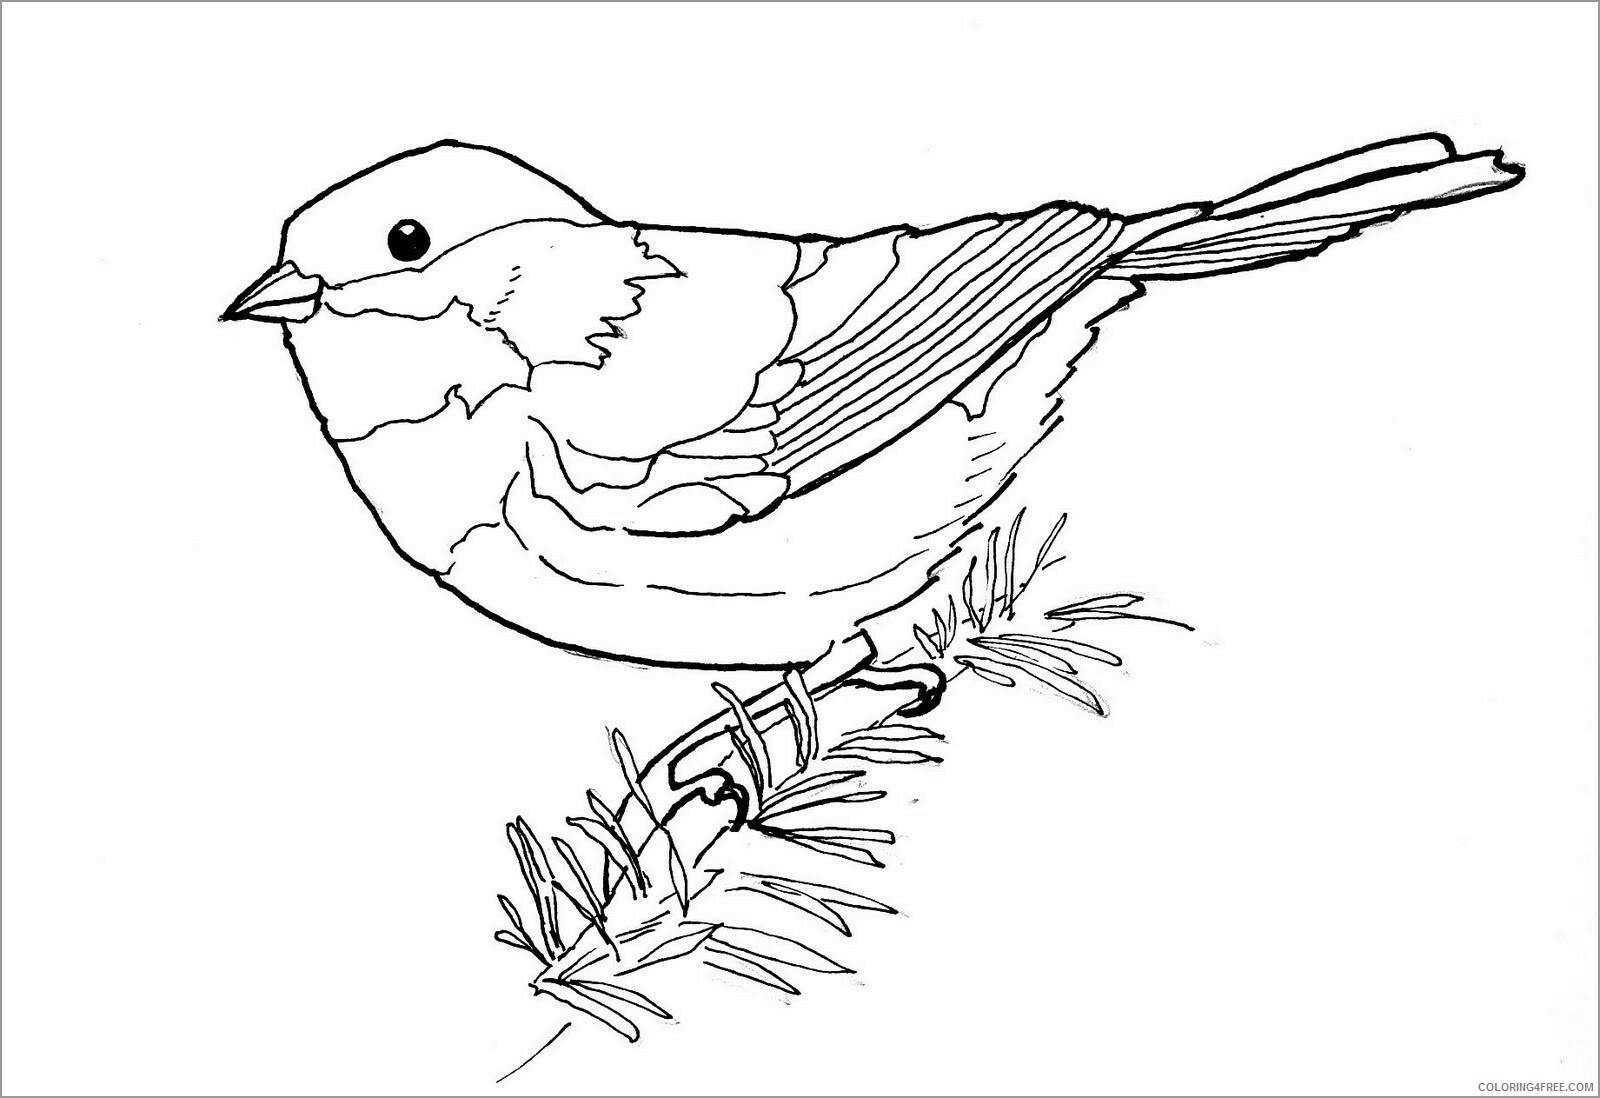 Chickadee Coloring Pages Animal Printable Sheets black capped chickadee kids 2021 Coloring4free